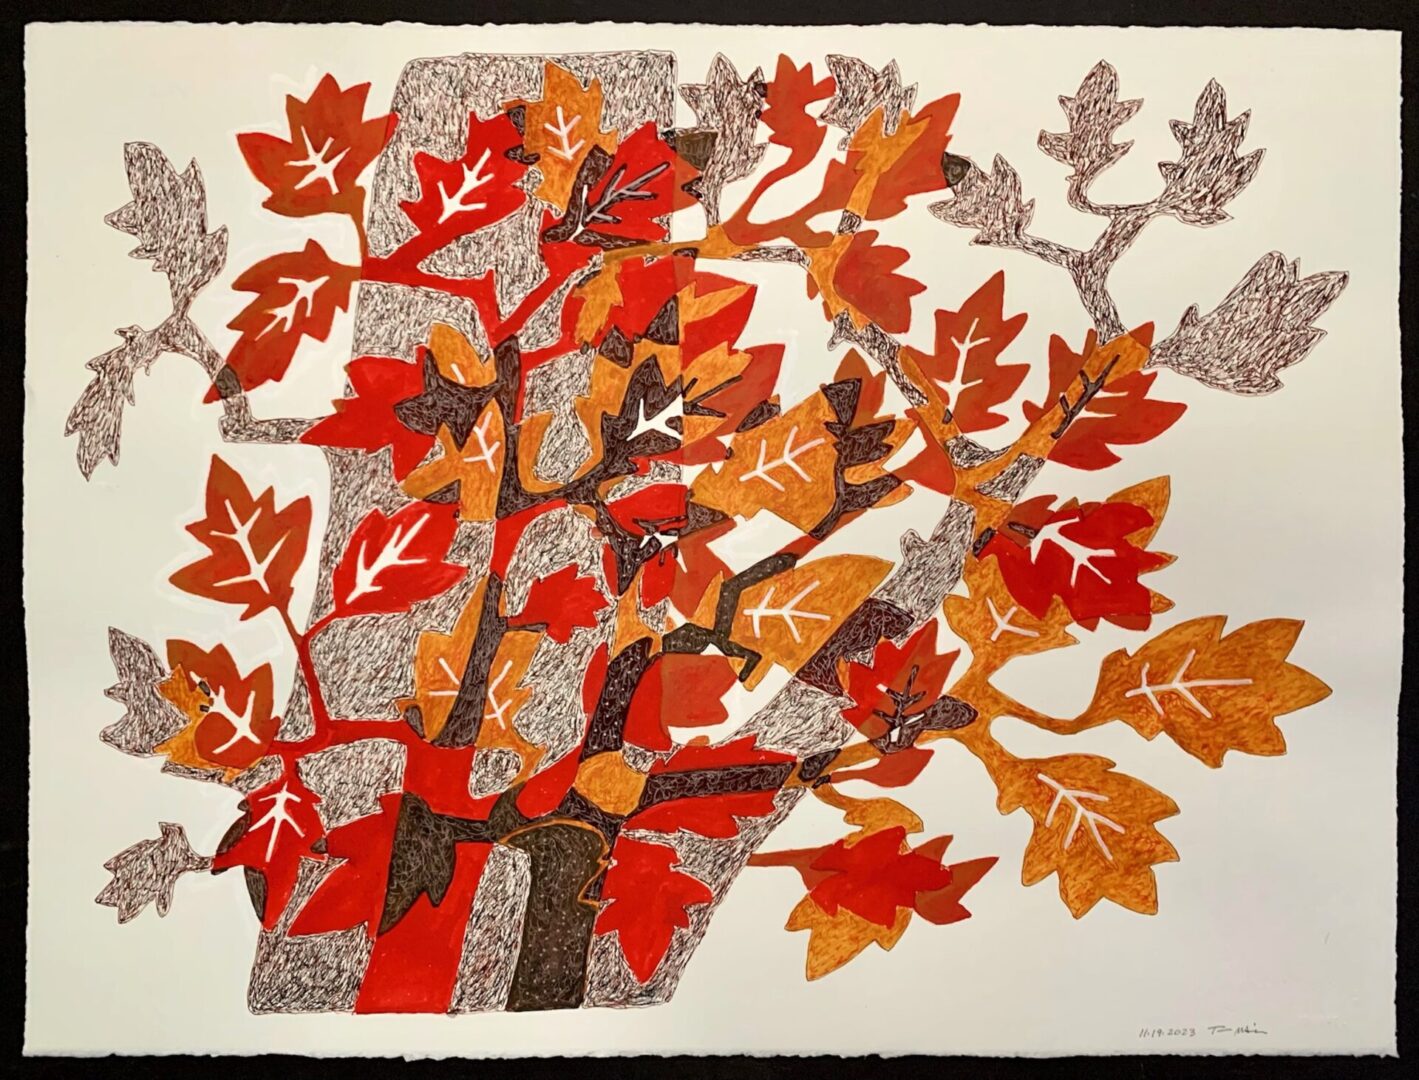 A painting of leaves on the ground and trees